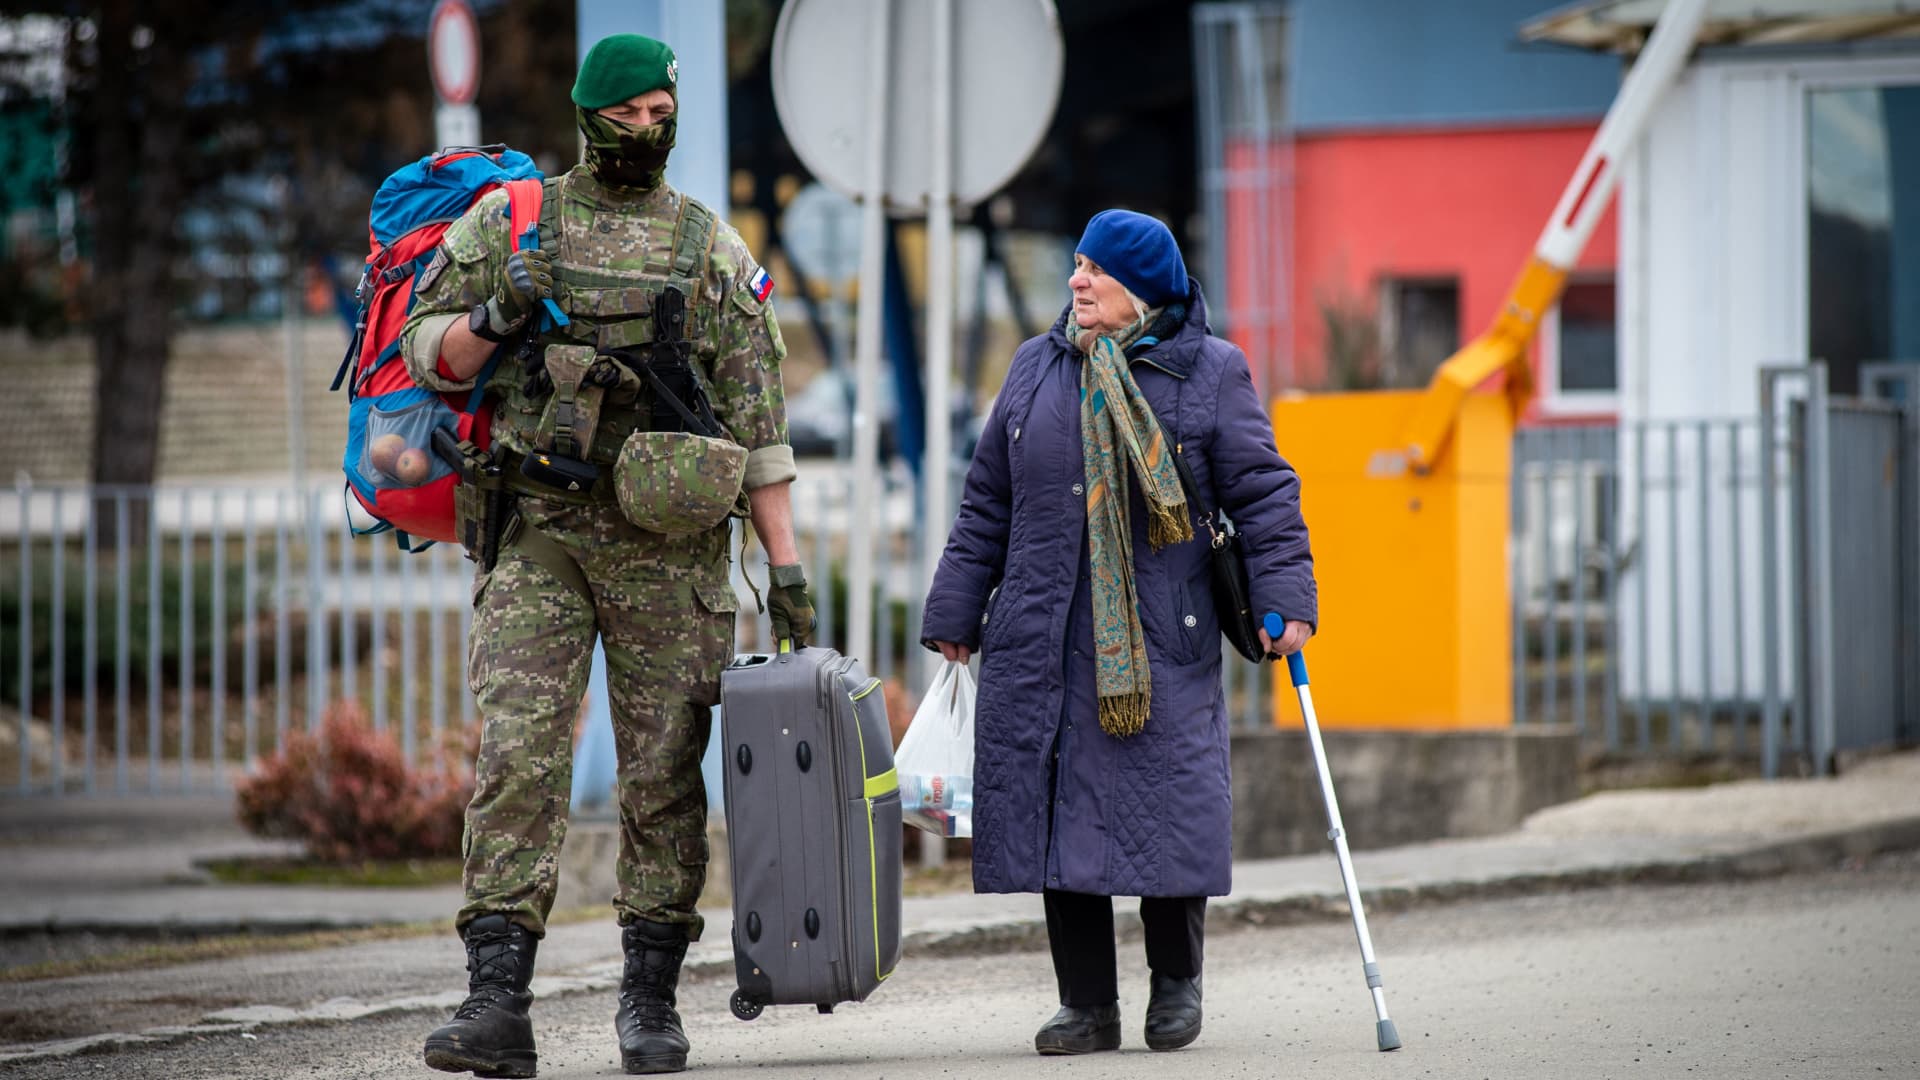 A Slovak soldier helps a Ukrainian woman to carry her luggage after after she crossed the border in Vysne Nemecke, eastern Slovakia, on February 26, 2022.